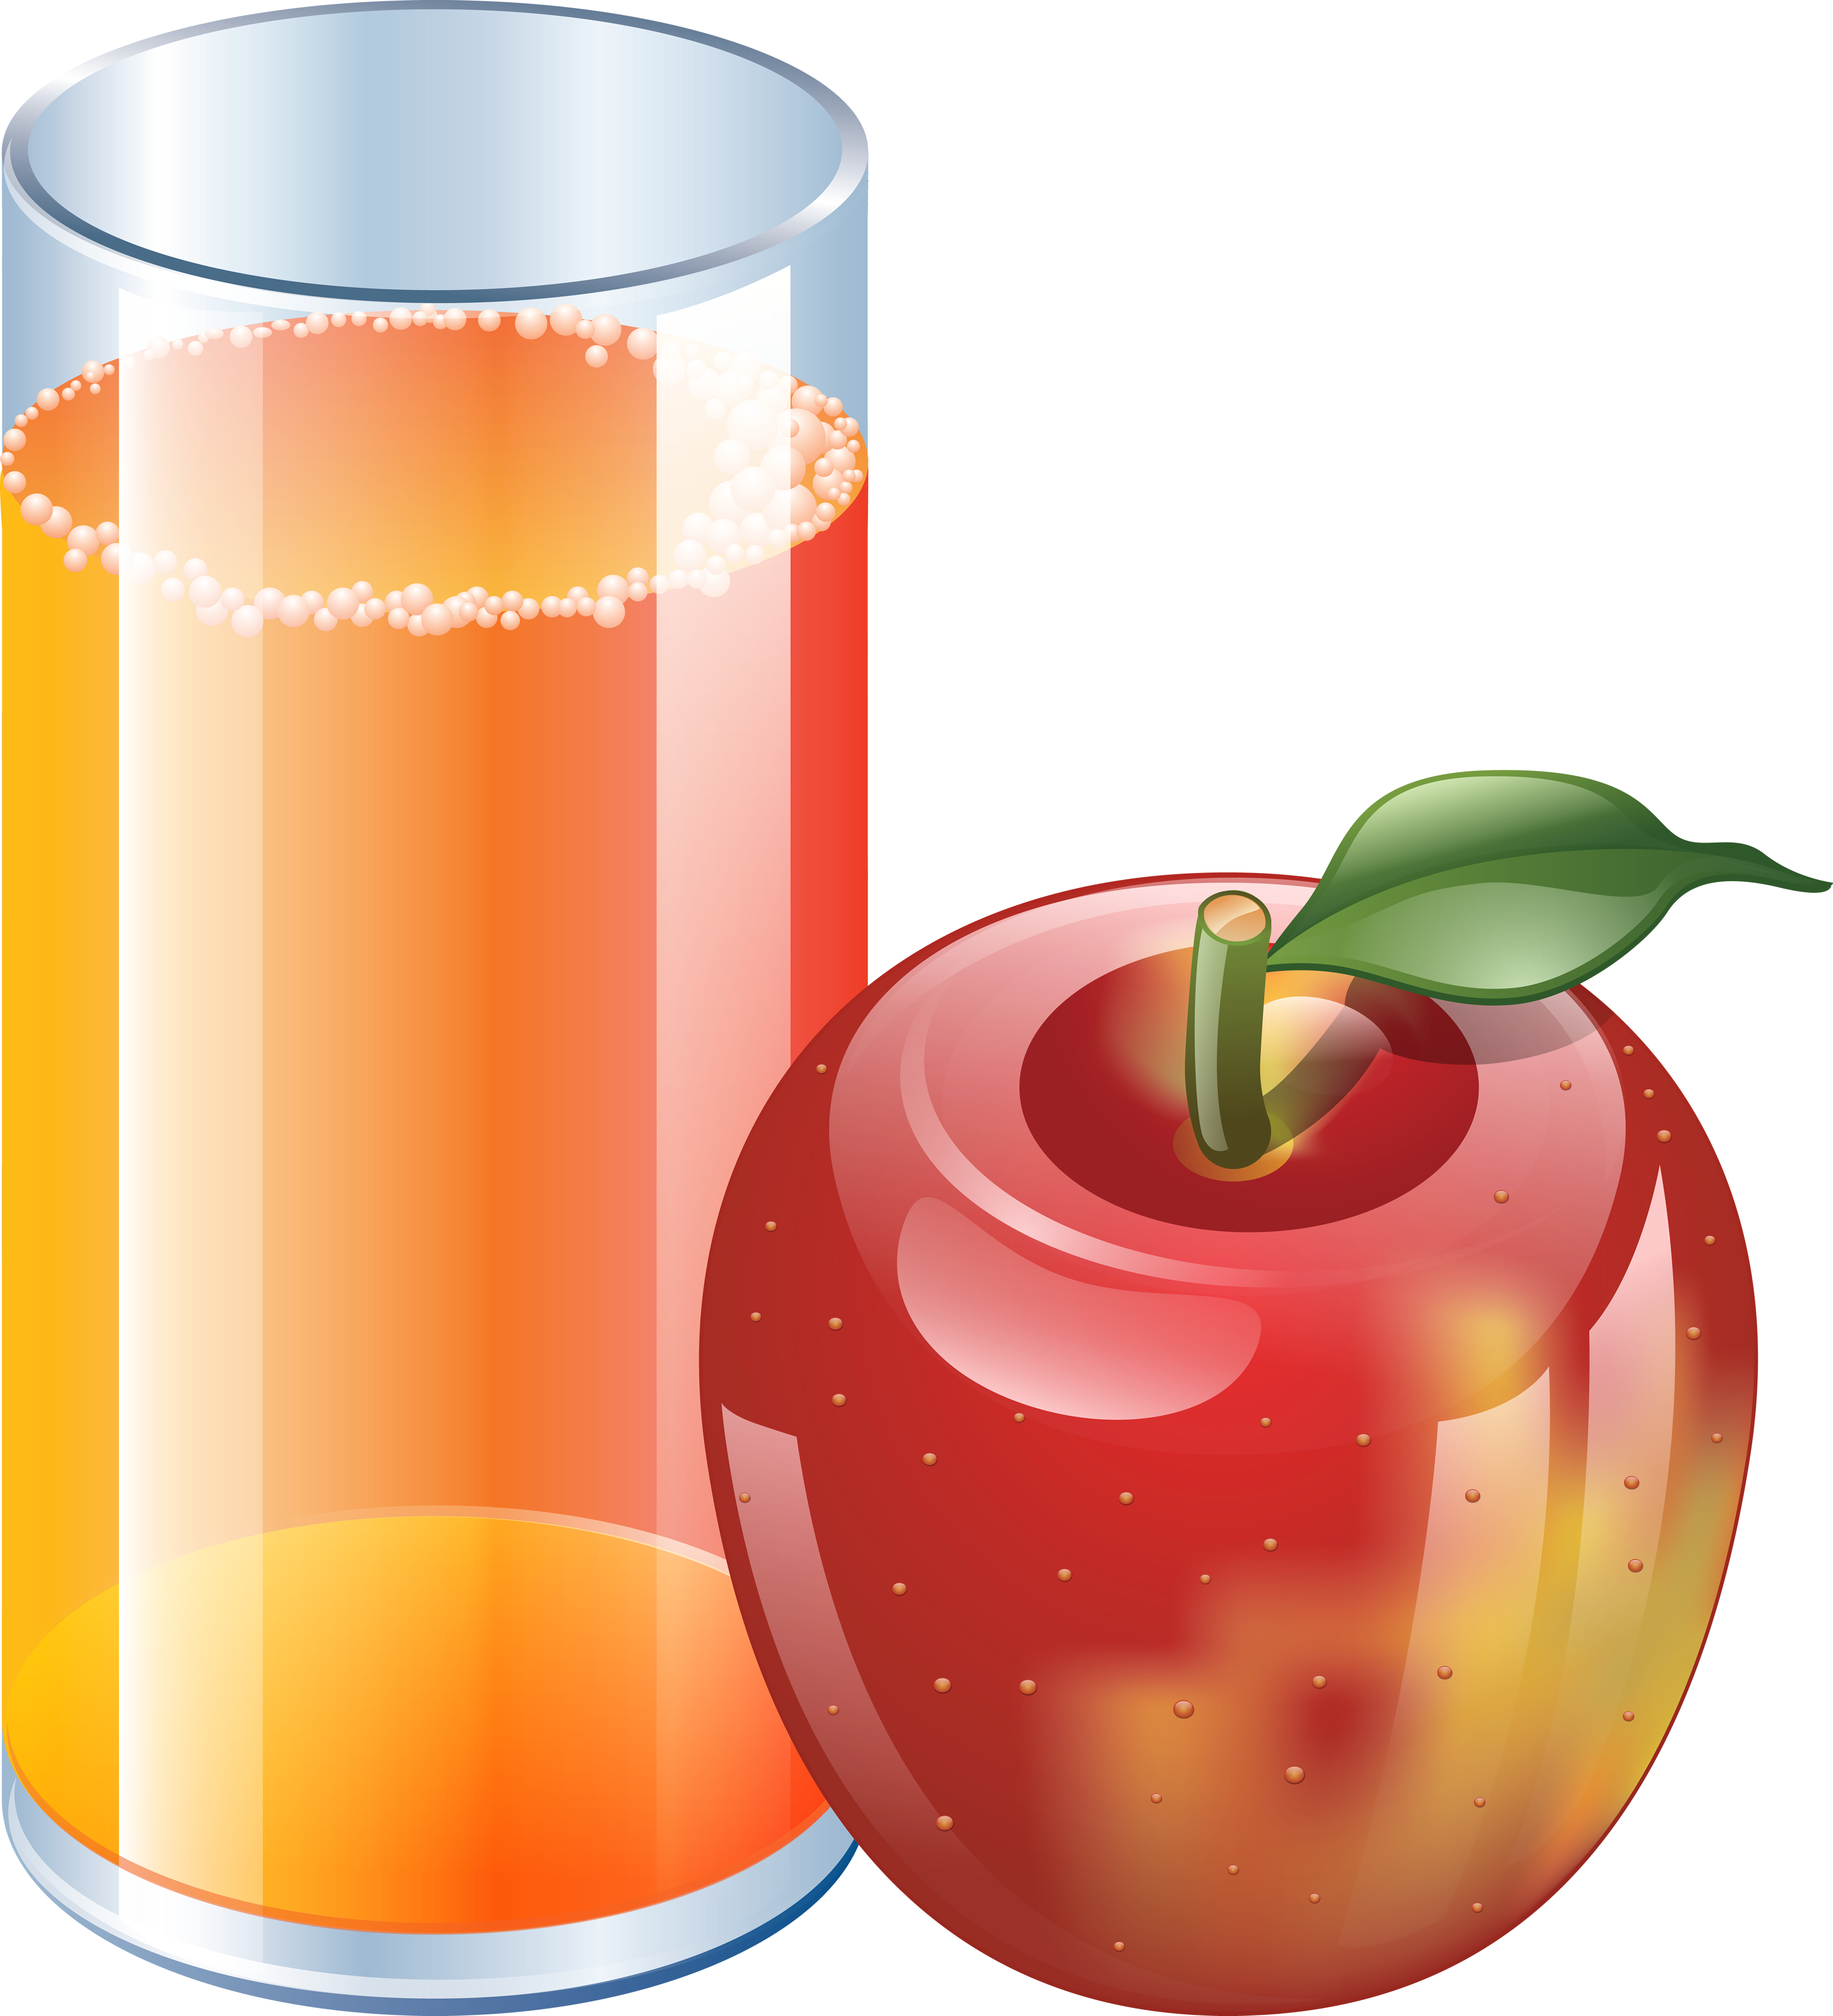 Fruit juice and beverage cups